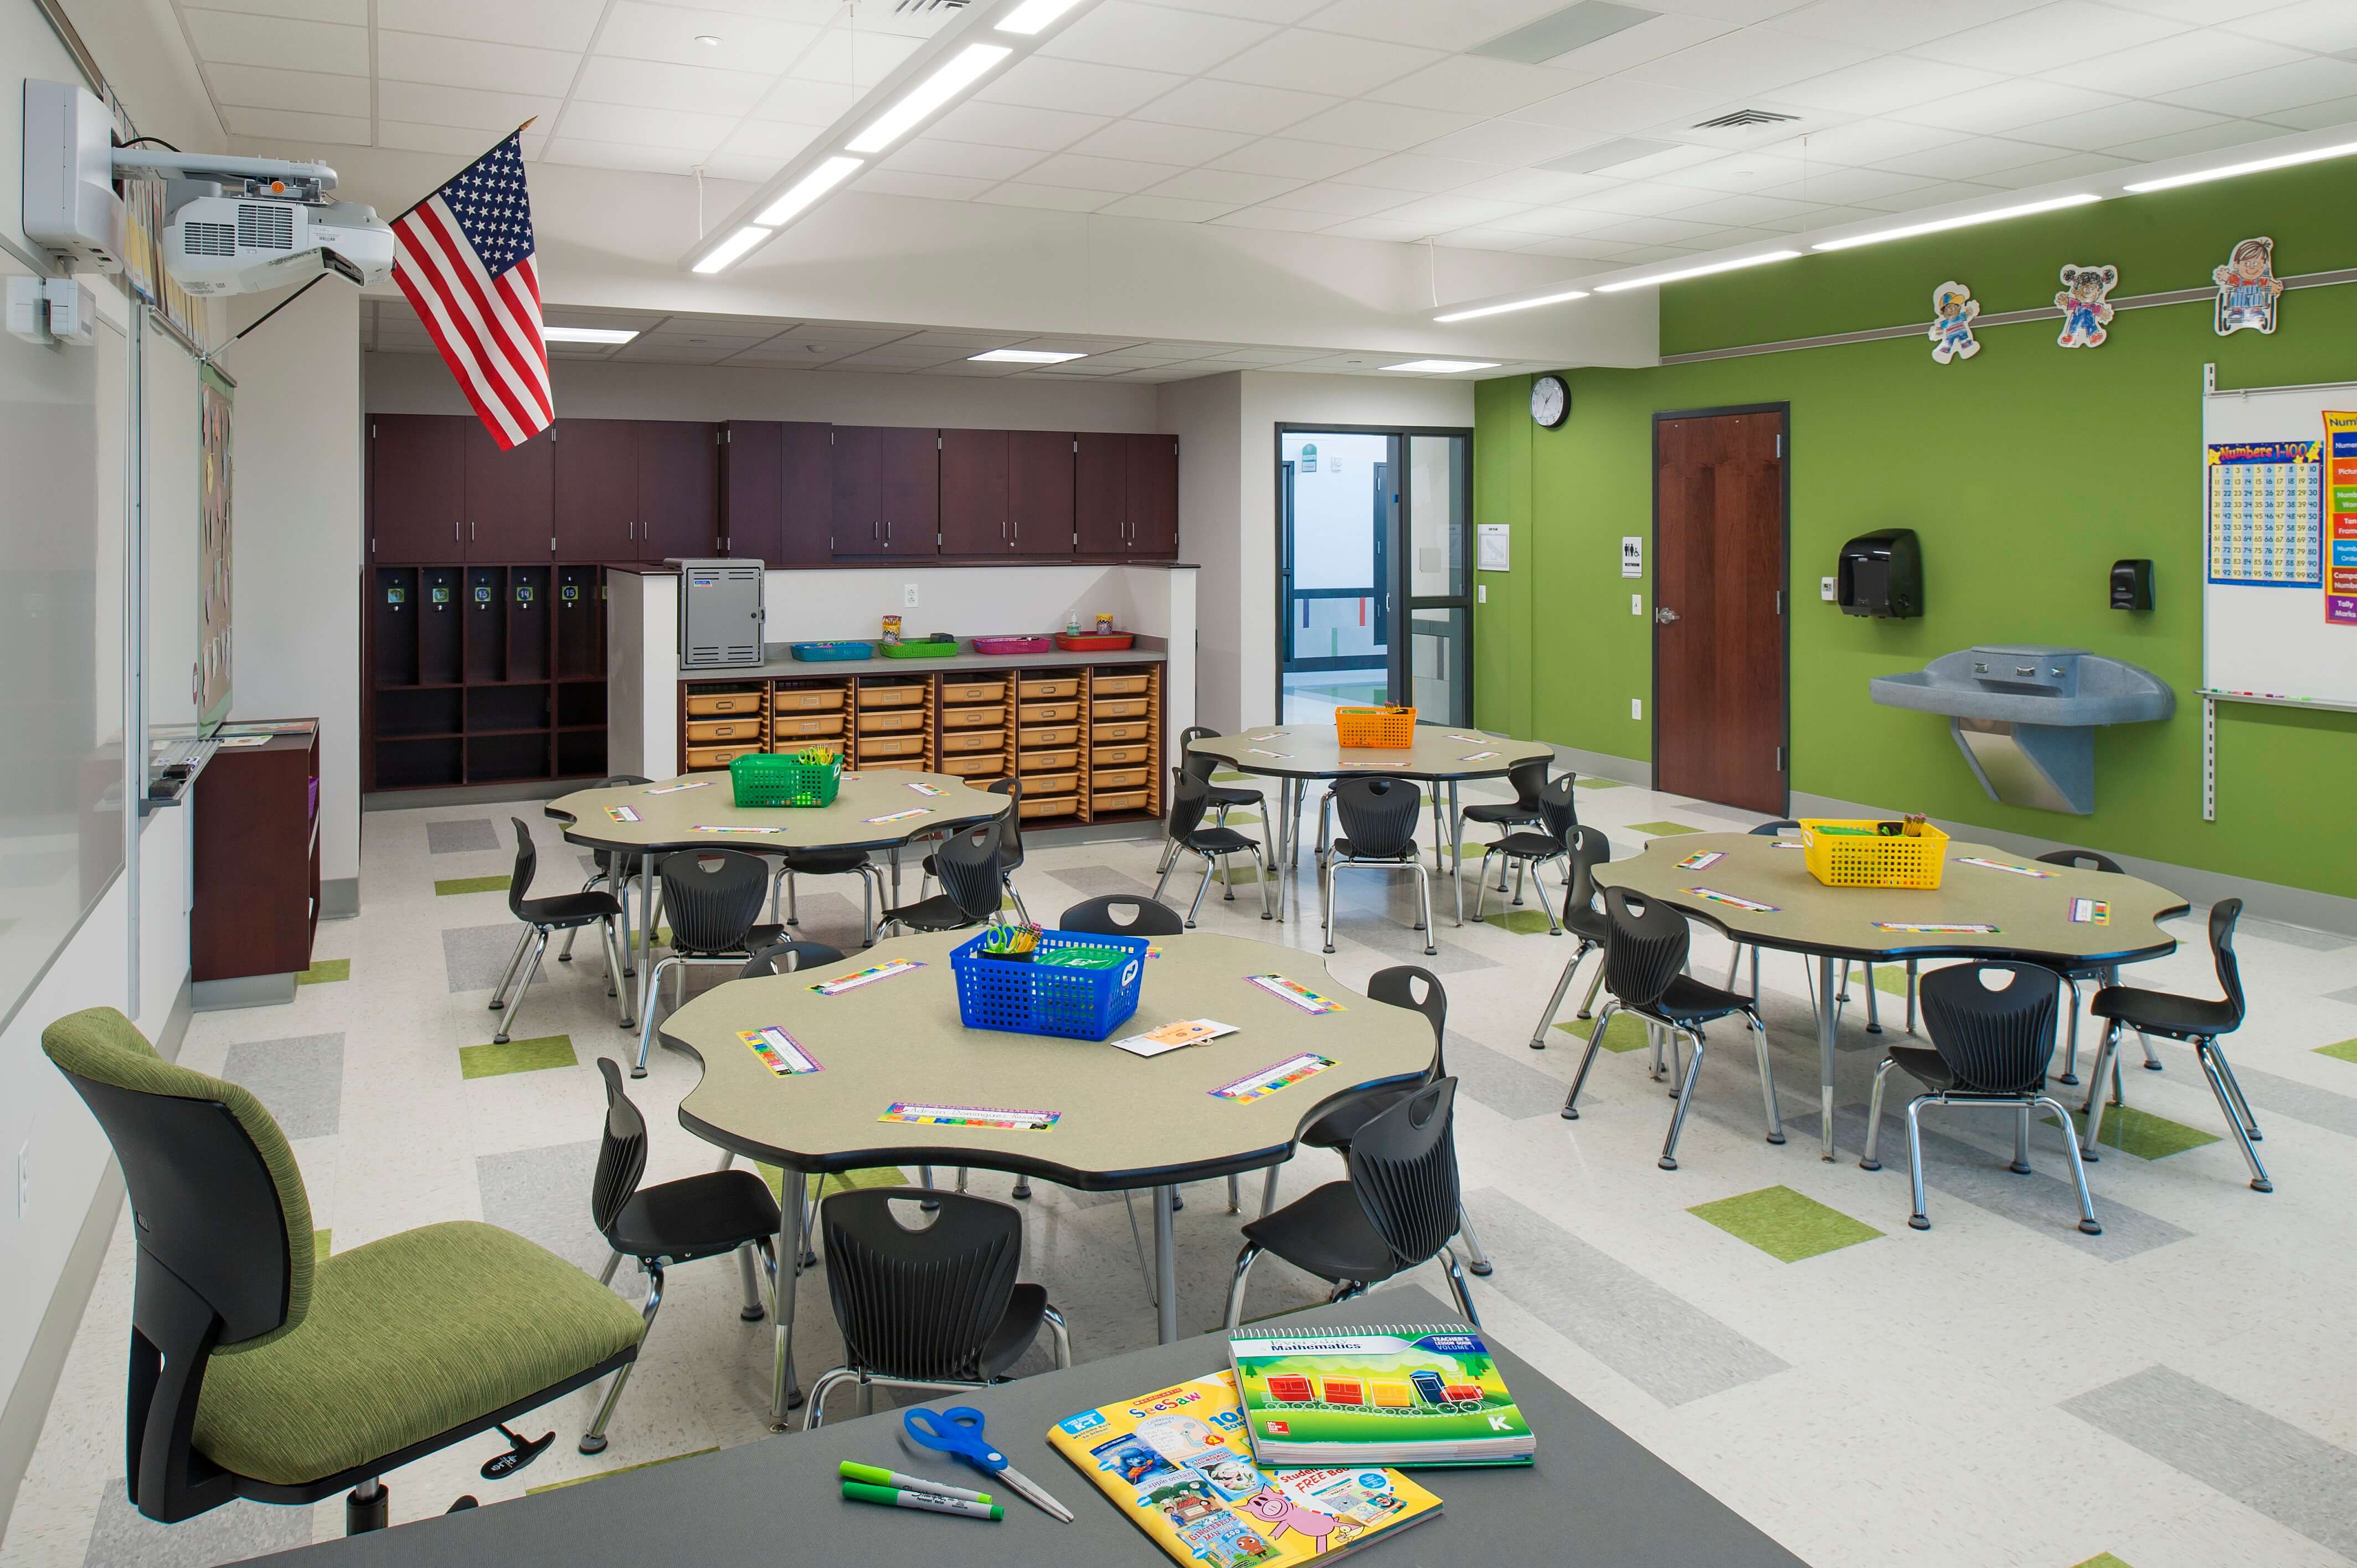 Skepton Construction builds new school for Hallowell Elementary students